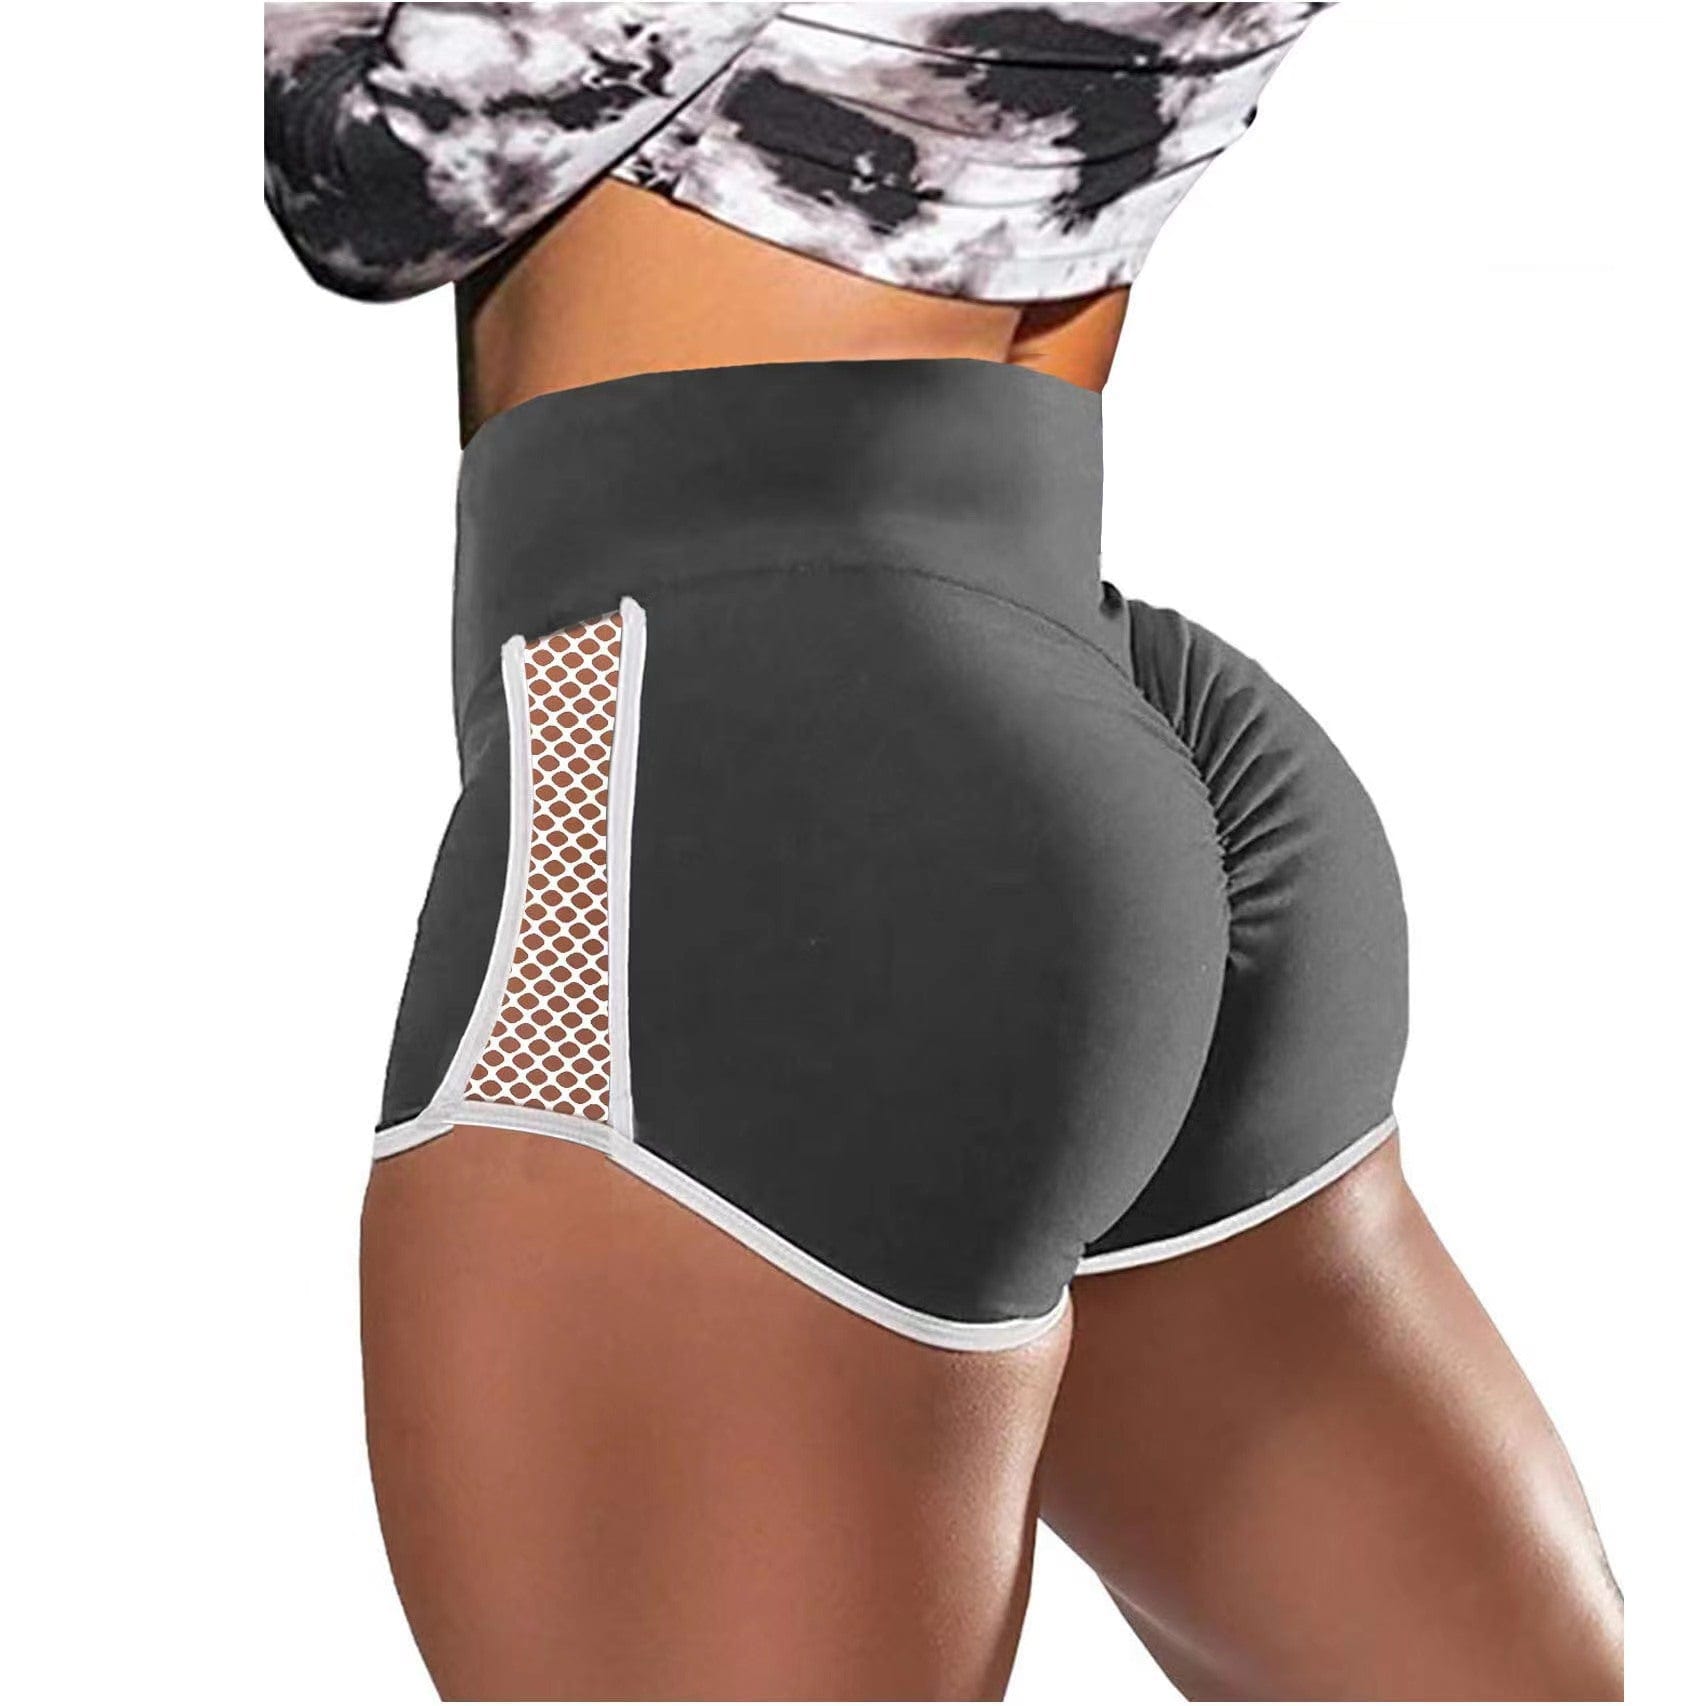 ALLRJ Gray / L Cross-border European And American Foreign Trade Shorts High Waist Shaping Shorts Fitness Sports Pants Hollow Out Stitching Shorts